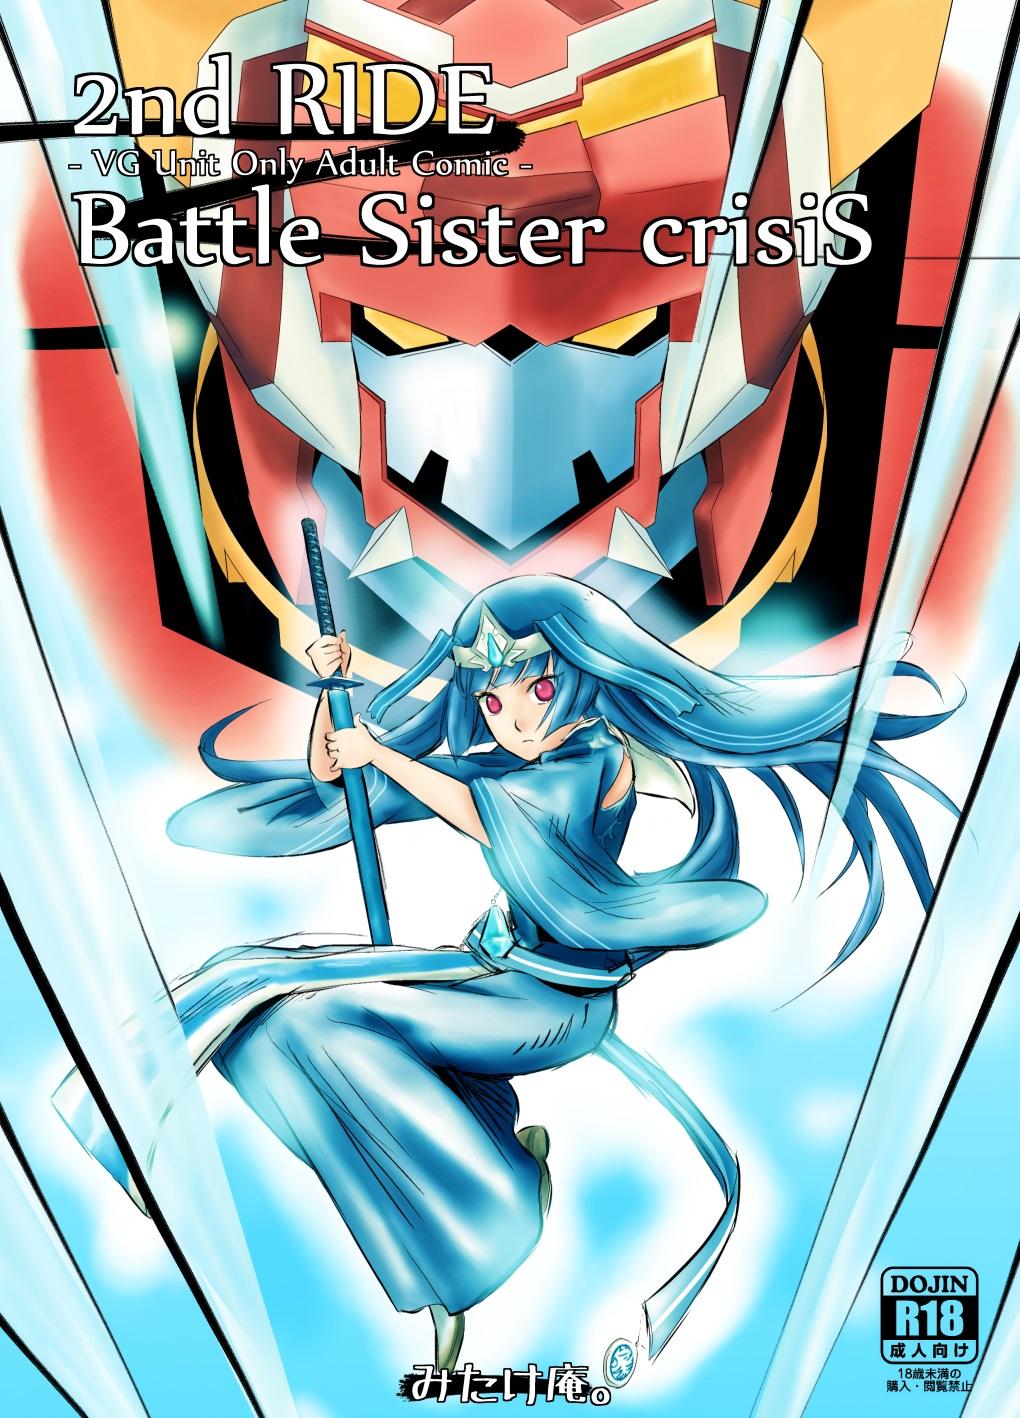 Tattoos 2nd RIDE Battle Sister crisiS - Cardfight vanguard The - Picture 1